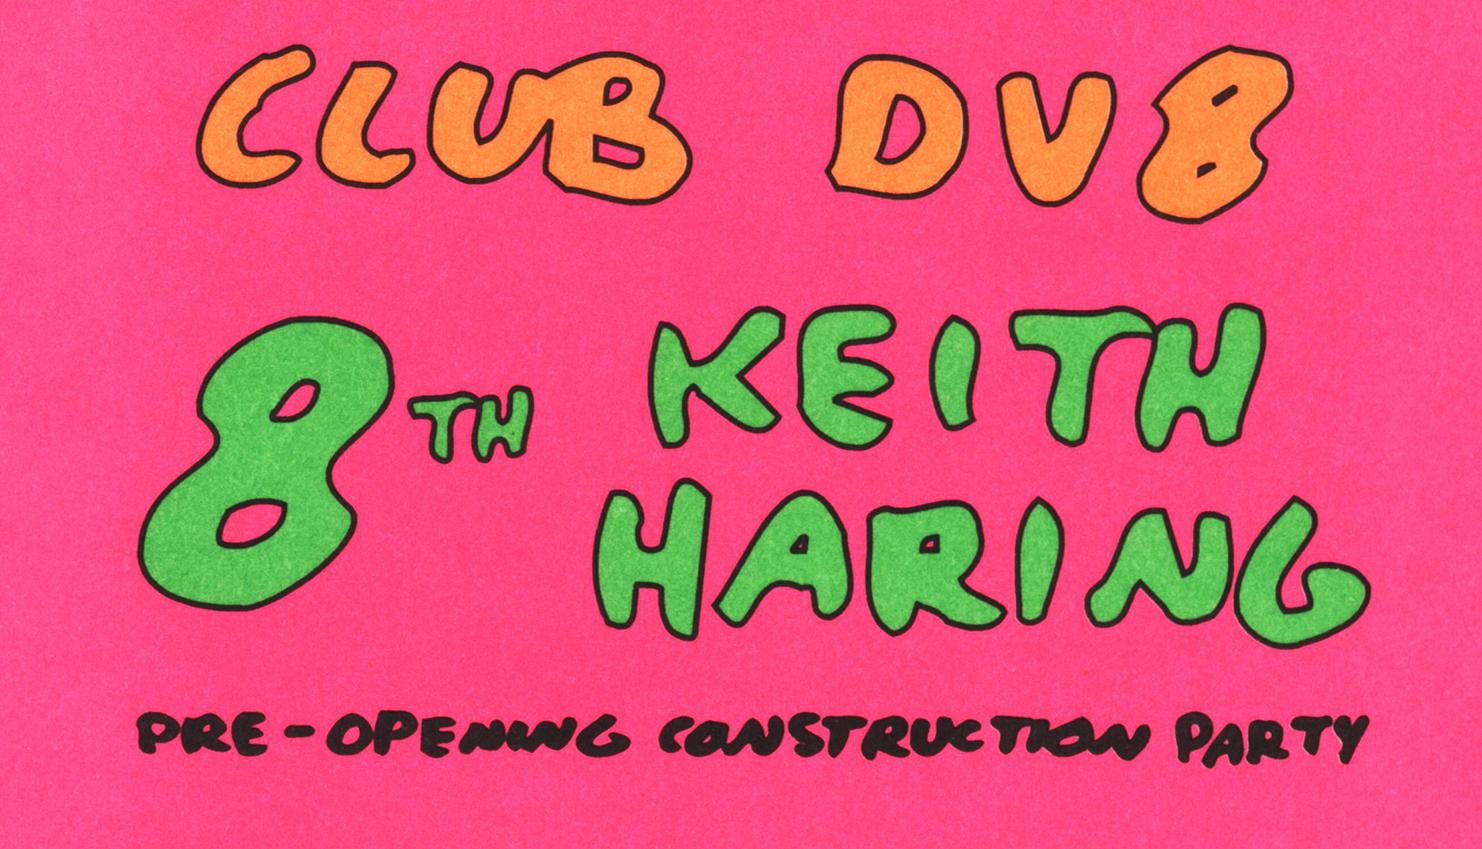 Keith Haring Club DV8 (annonce)  - Pop Art Print par (after) Keith Haring